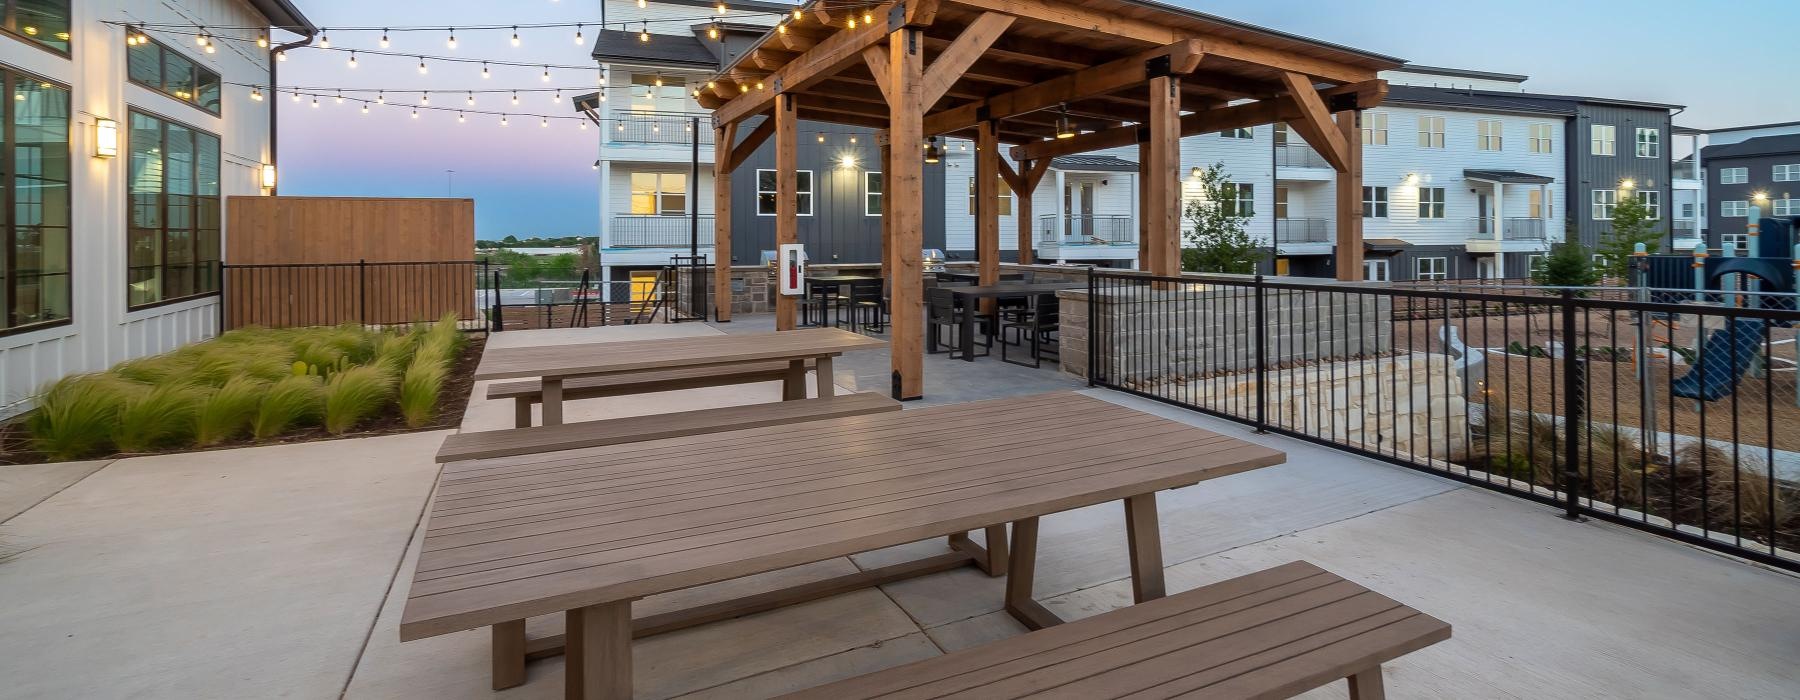 wooden picnic tables on a deck with stringed lighting